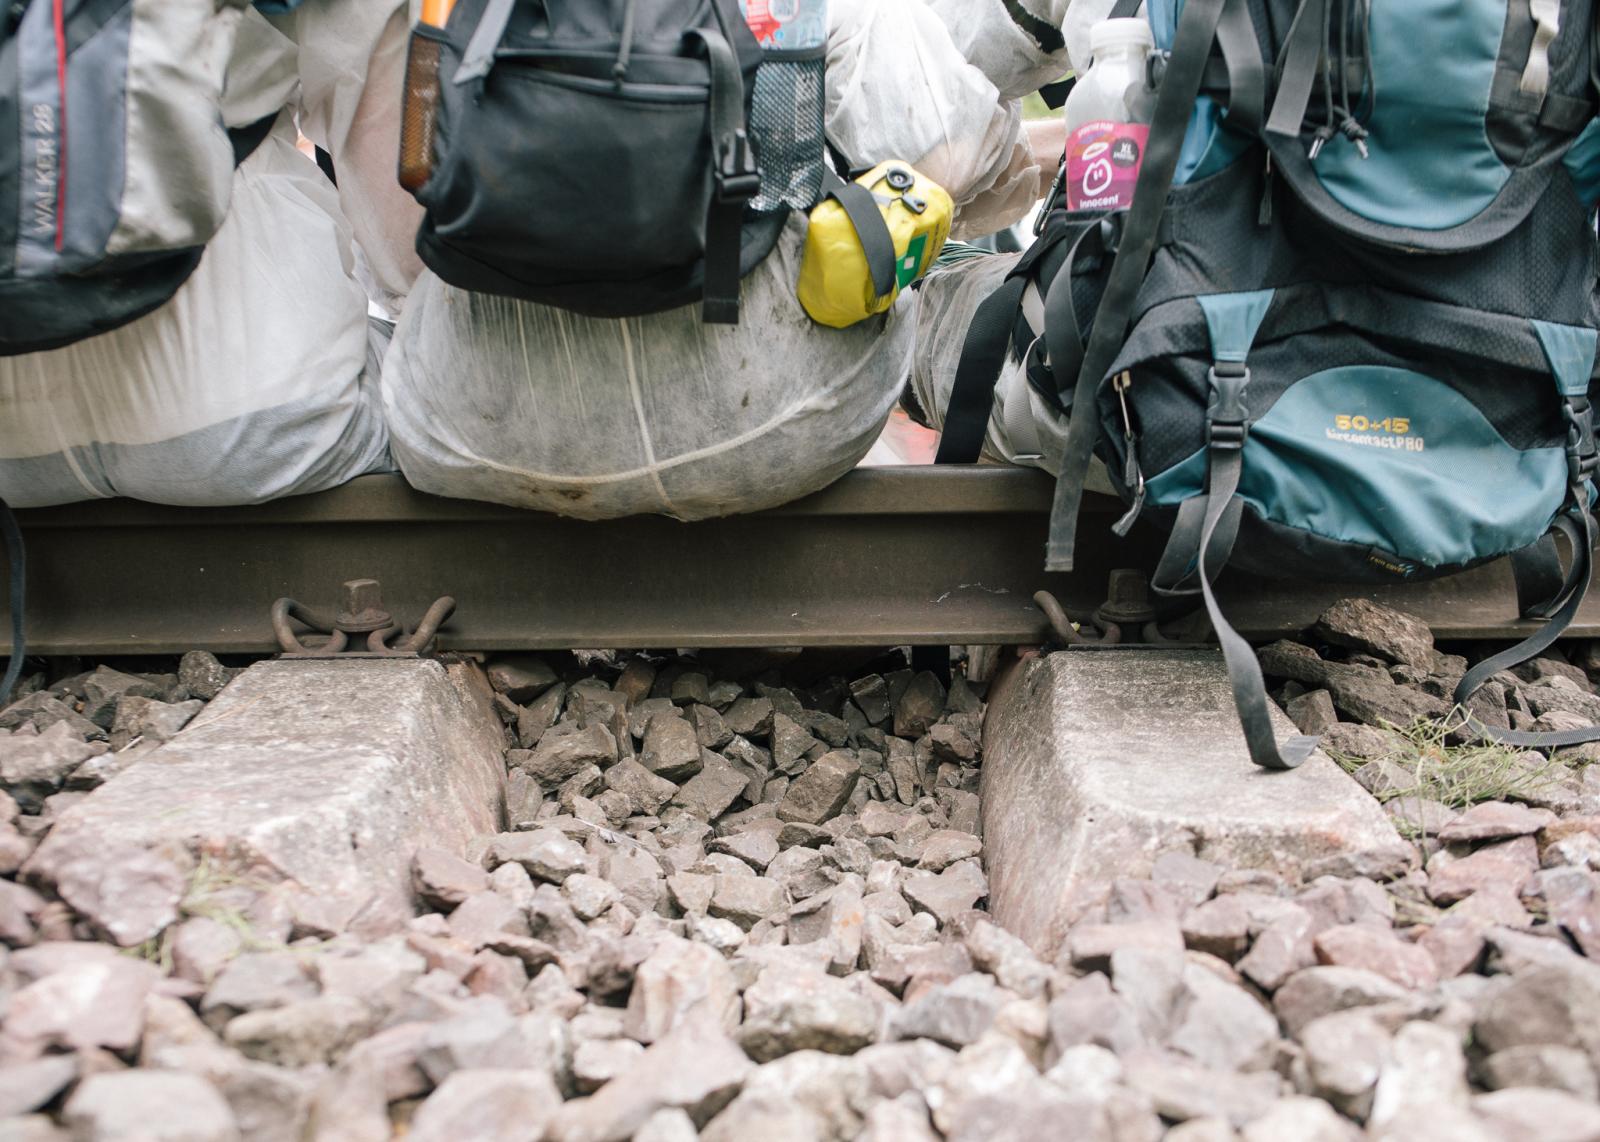 A week of protest against LNG, Neo-colonial Exploitation and Fossil Capitalism in Hamburg - Activists dig out stones below the train tracks making...